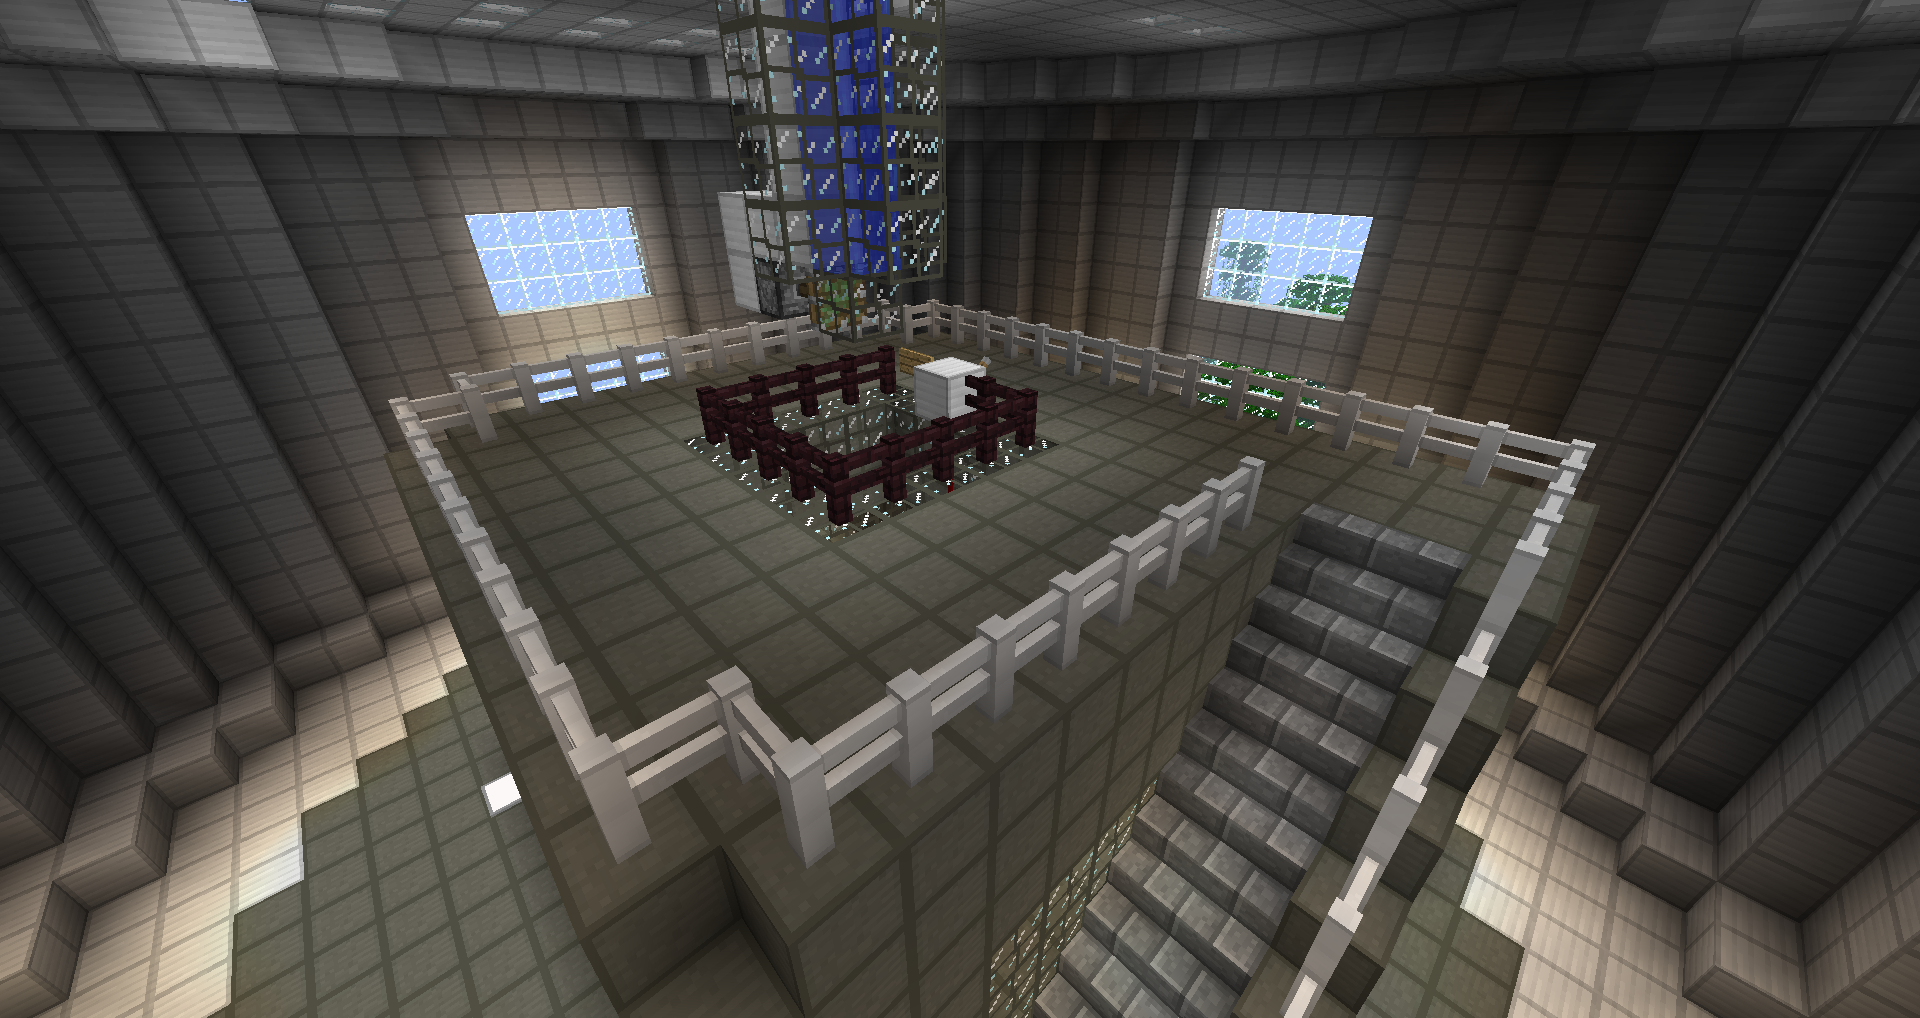 Top of reactor chamber with emergency water supply.